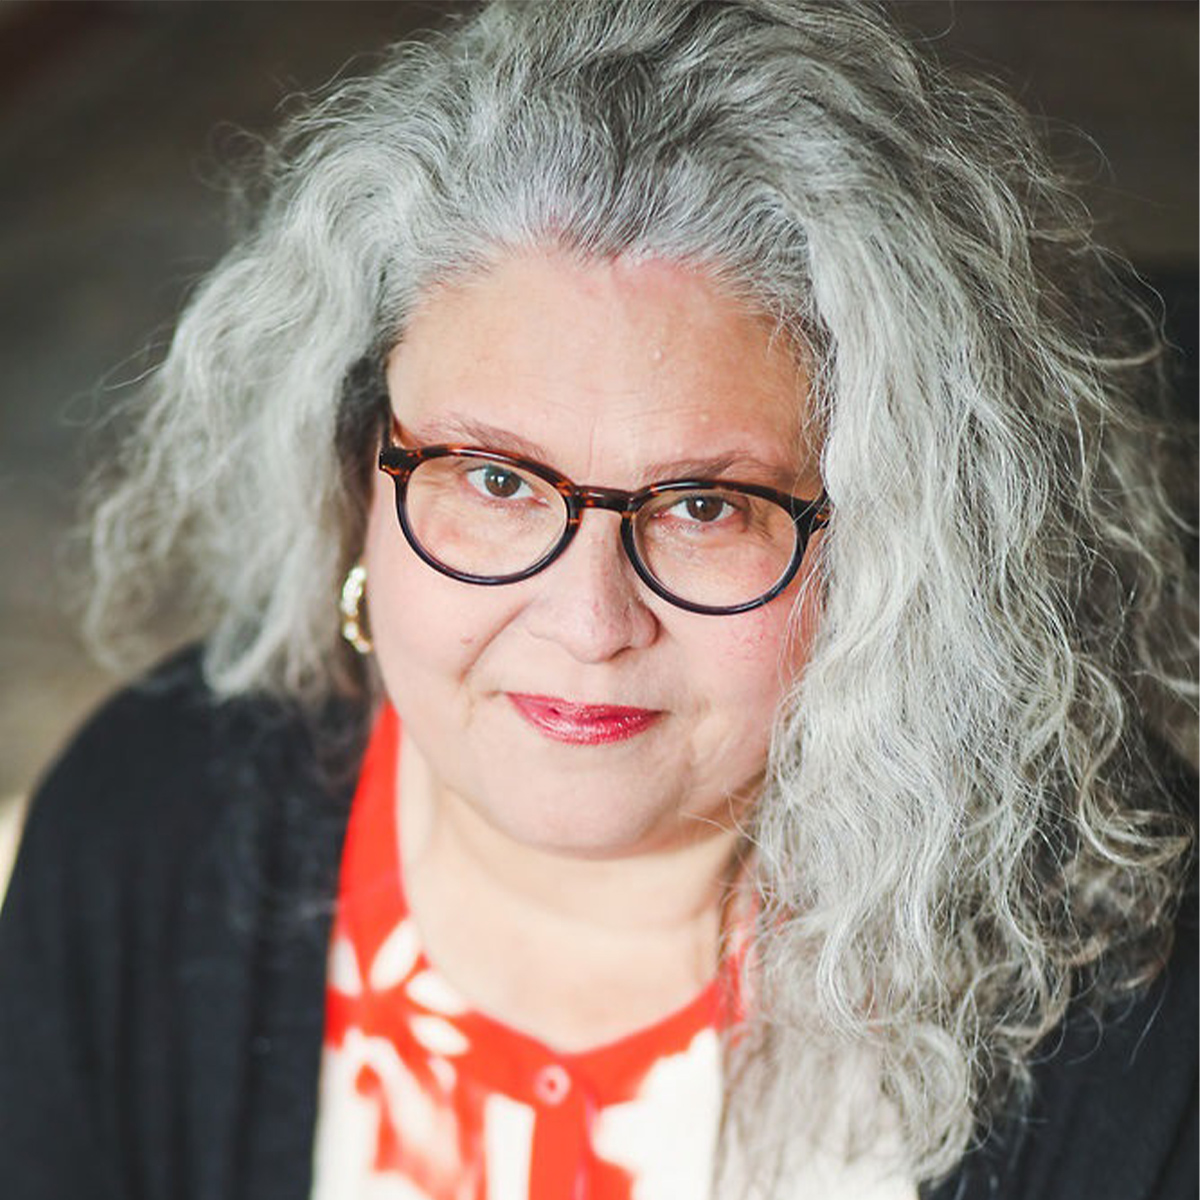 Laura Rowe color portrait. Laura has silver, gray curly hair that ends past her shoulders. She is smiling and wearing a red and white patterned top, a black cardigan and plastic, circular eyeglasses on.